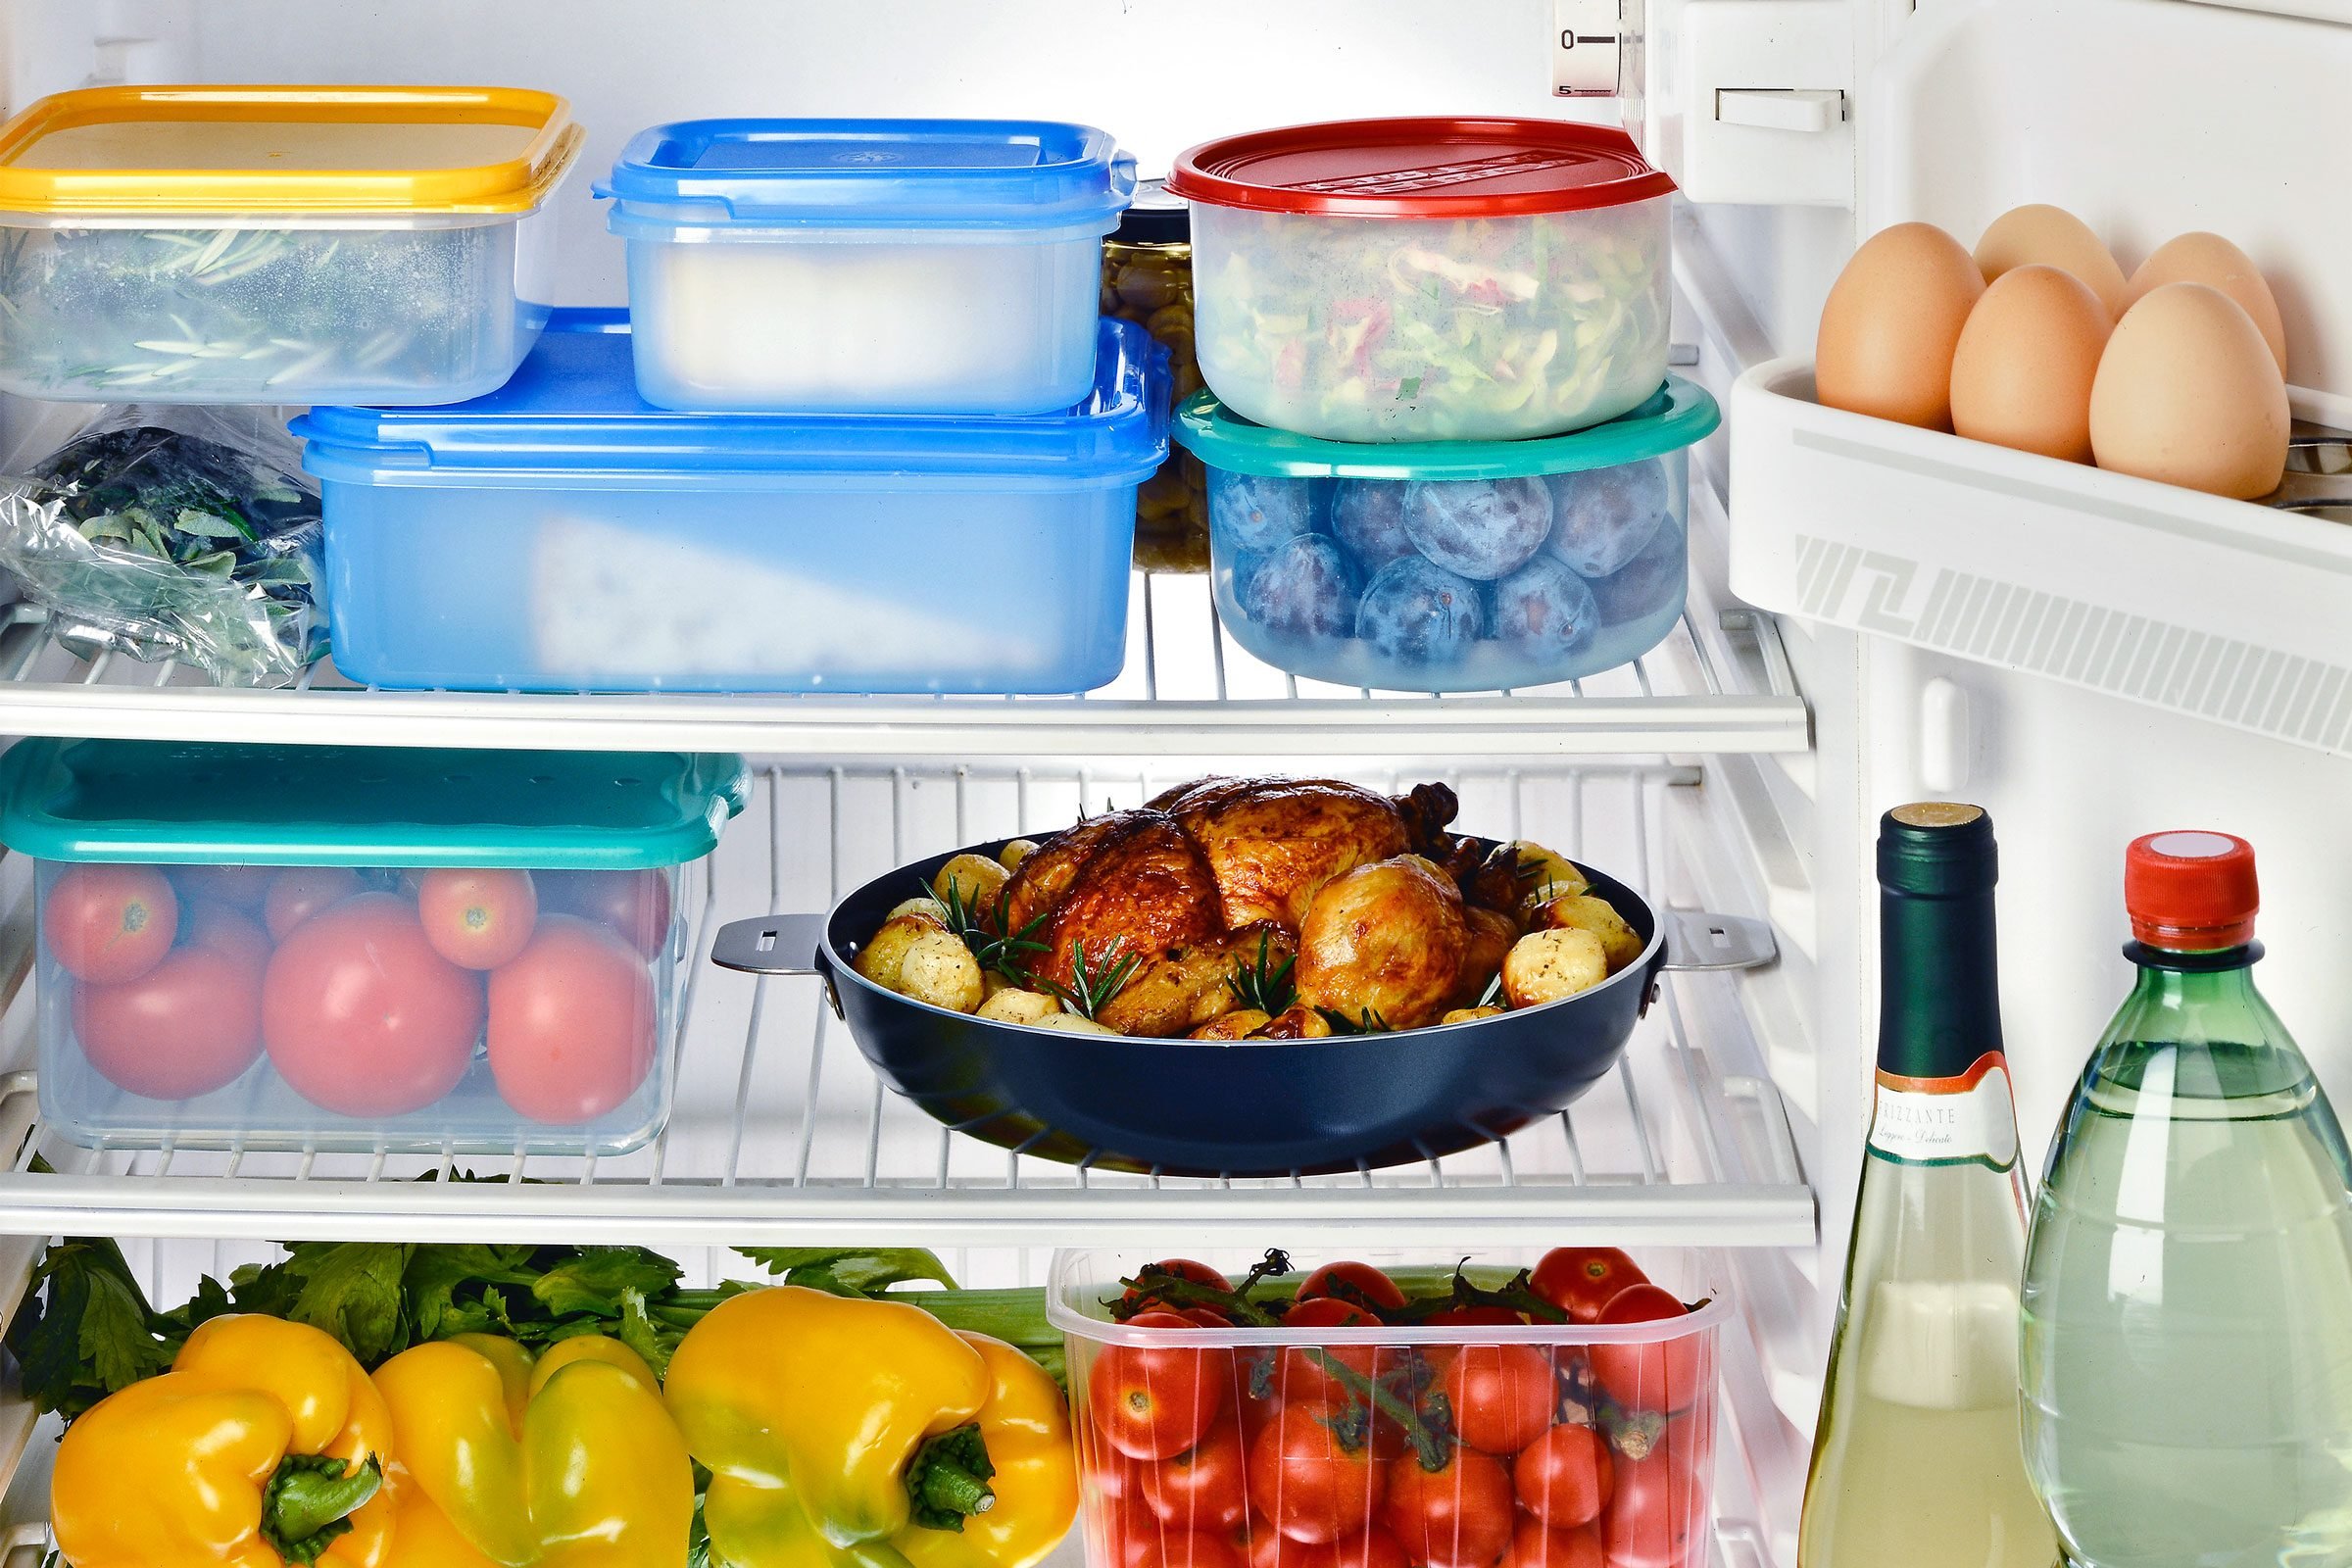 https://www.rd.com/wp-content/uploads/2022/11/assortment-of-food-in-open-refrigerator-GettyImages-486196614-MLedit.jpg